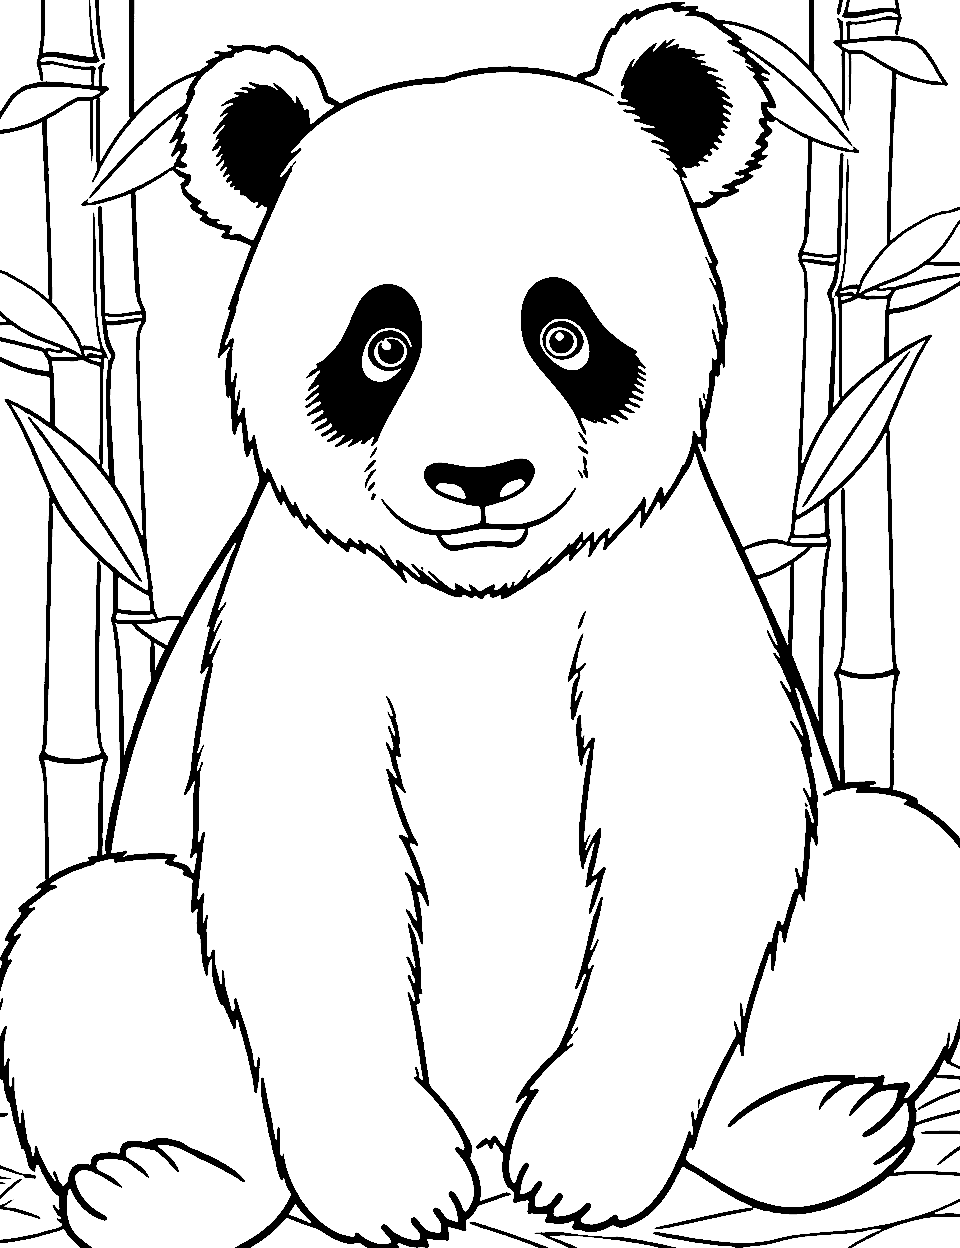 Panda and Bamboo Forest Coloring Page - A panda peacefully sitting amidst a sparse bamboo forest.